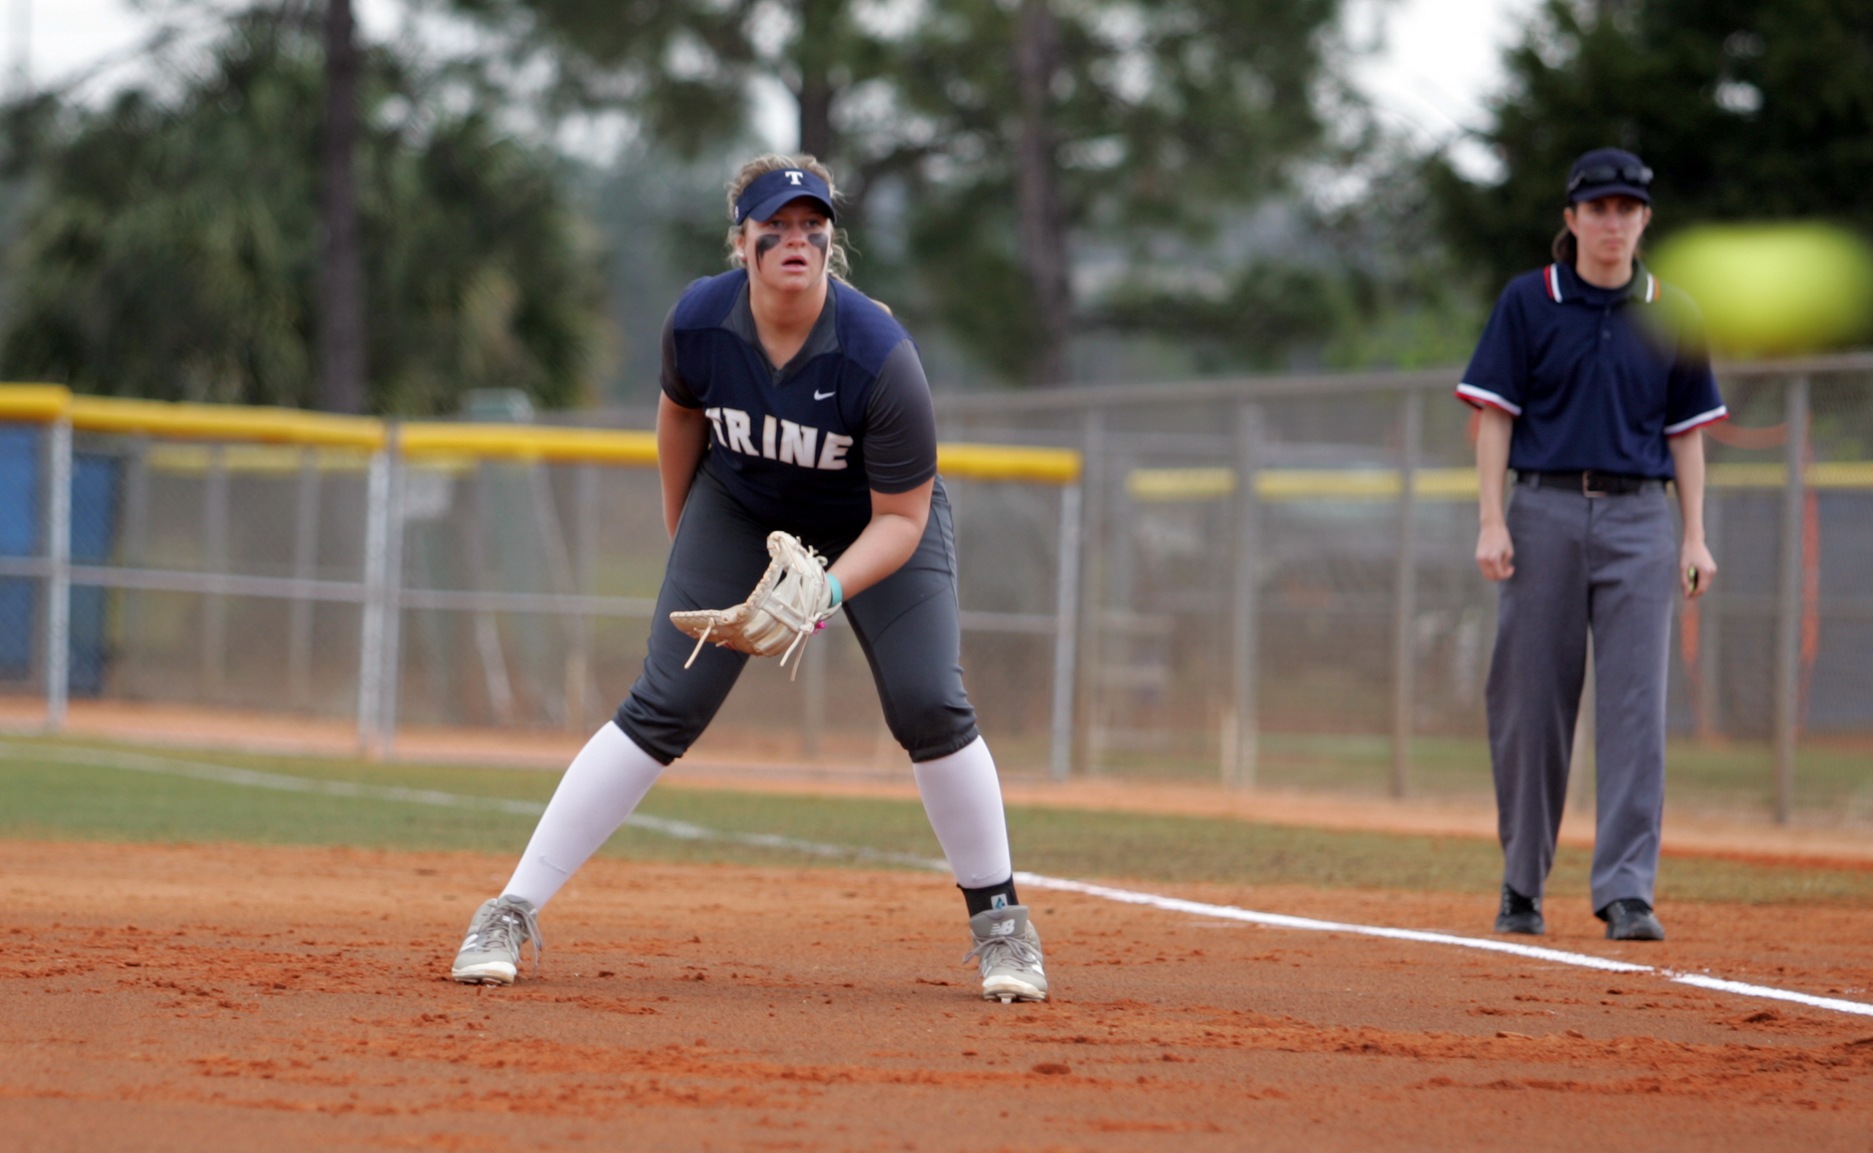 Fox Named to NFCA National Player of the Year Watchlist